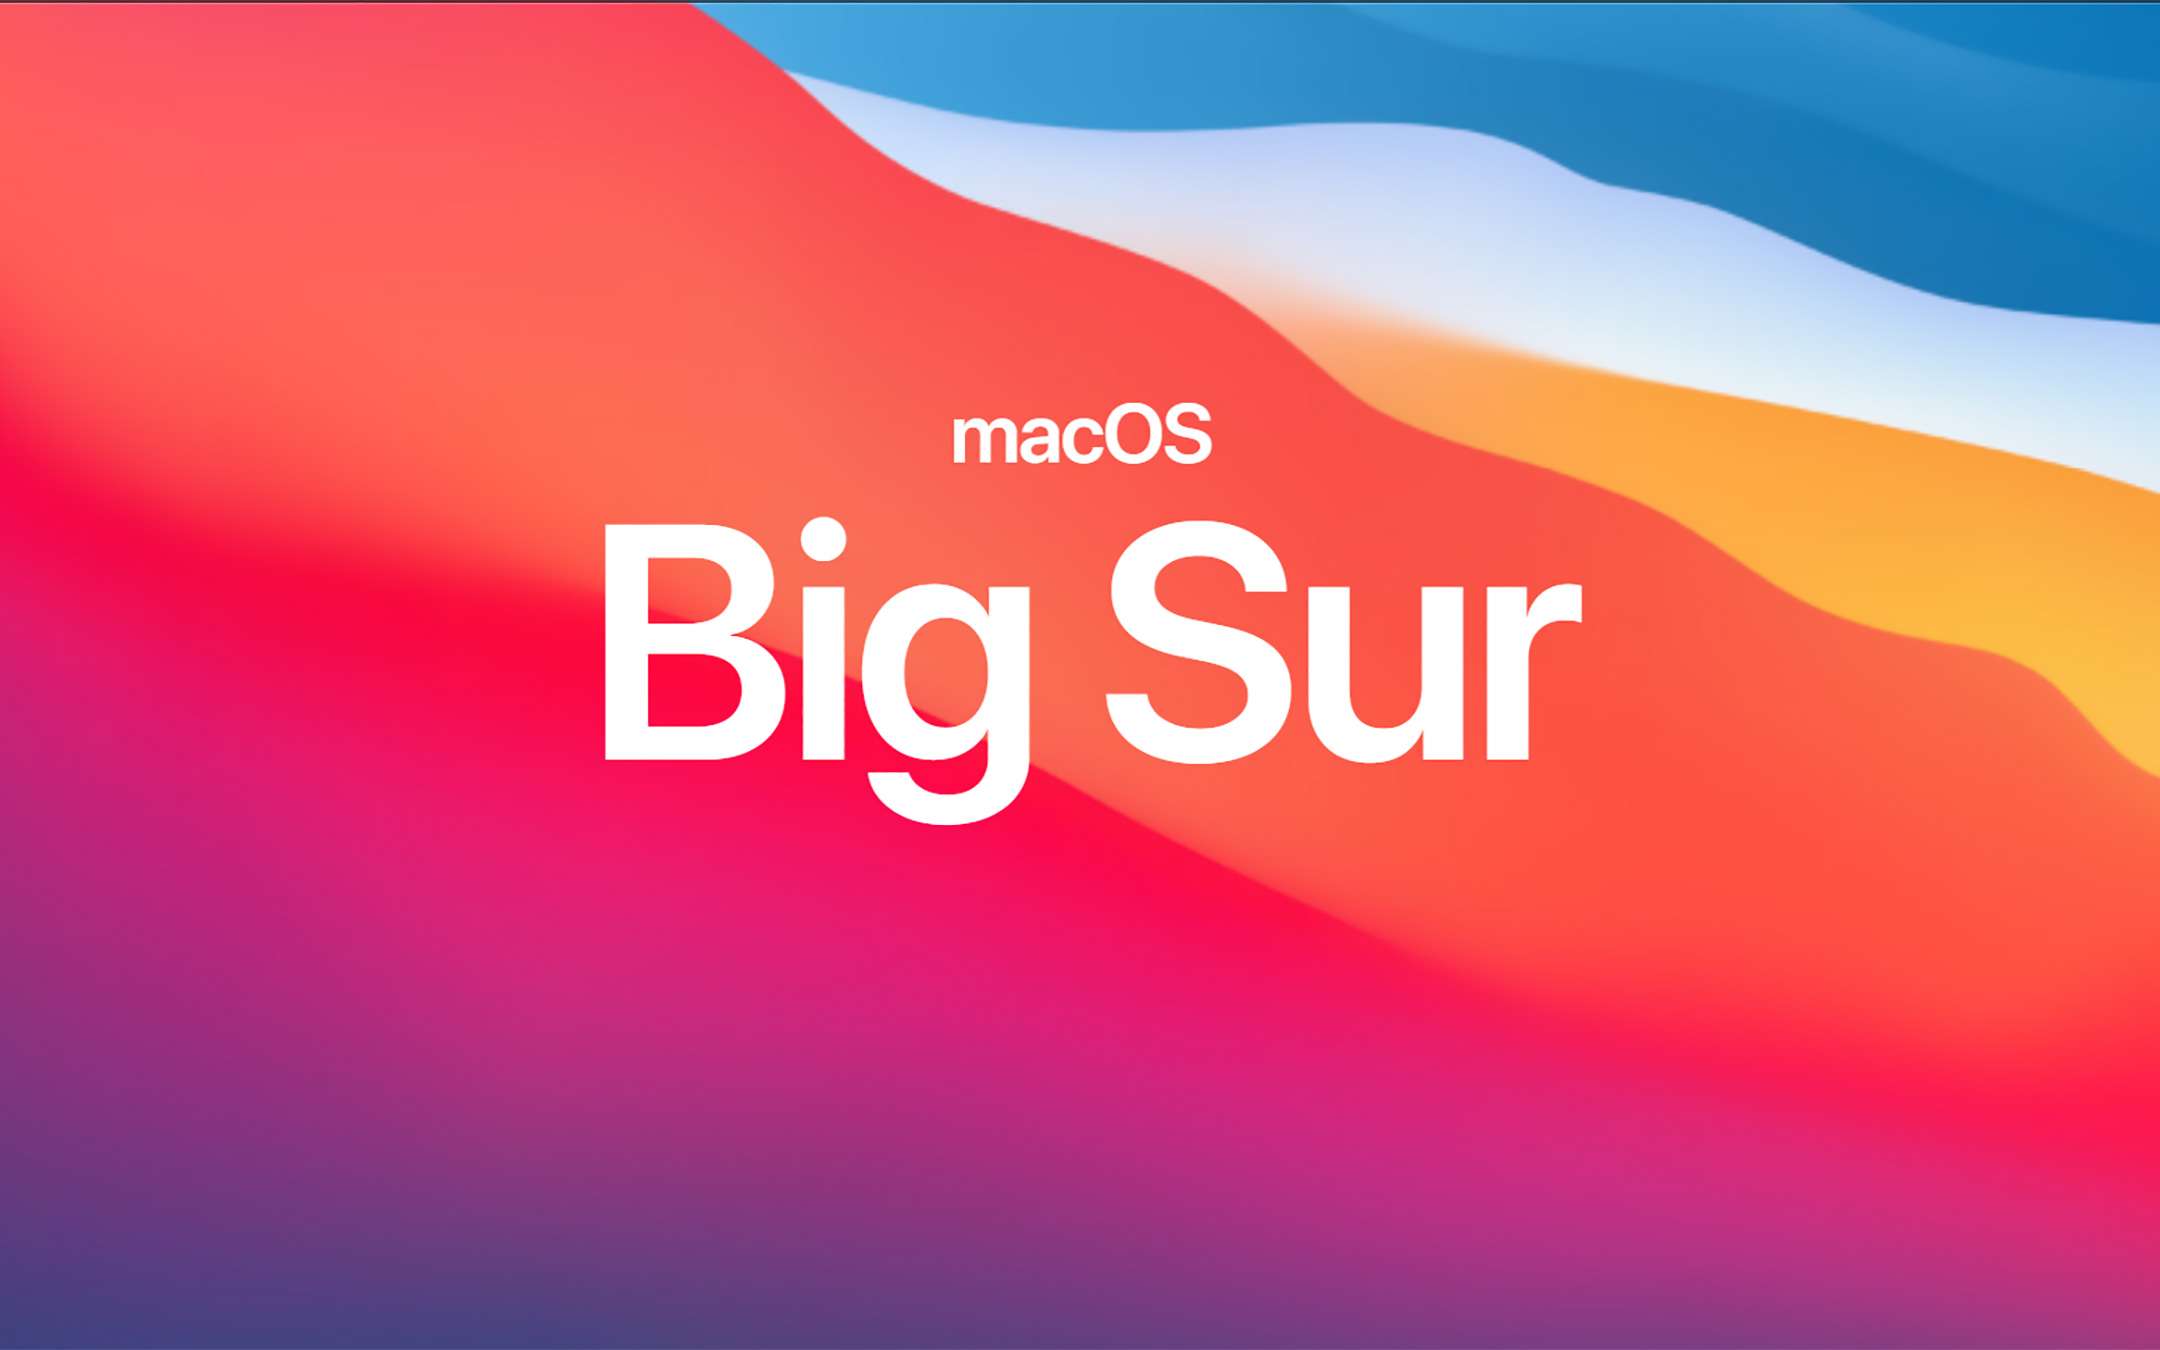 macOS Big Sur: Problems on MacBook Pro 2013 and 2014